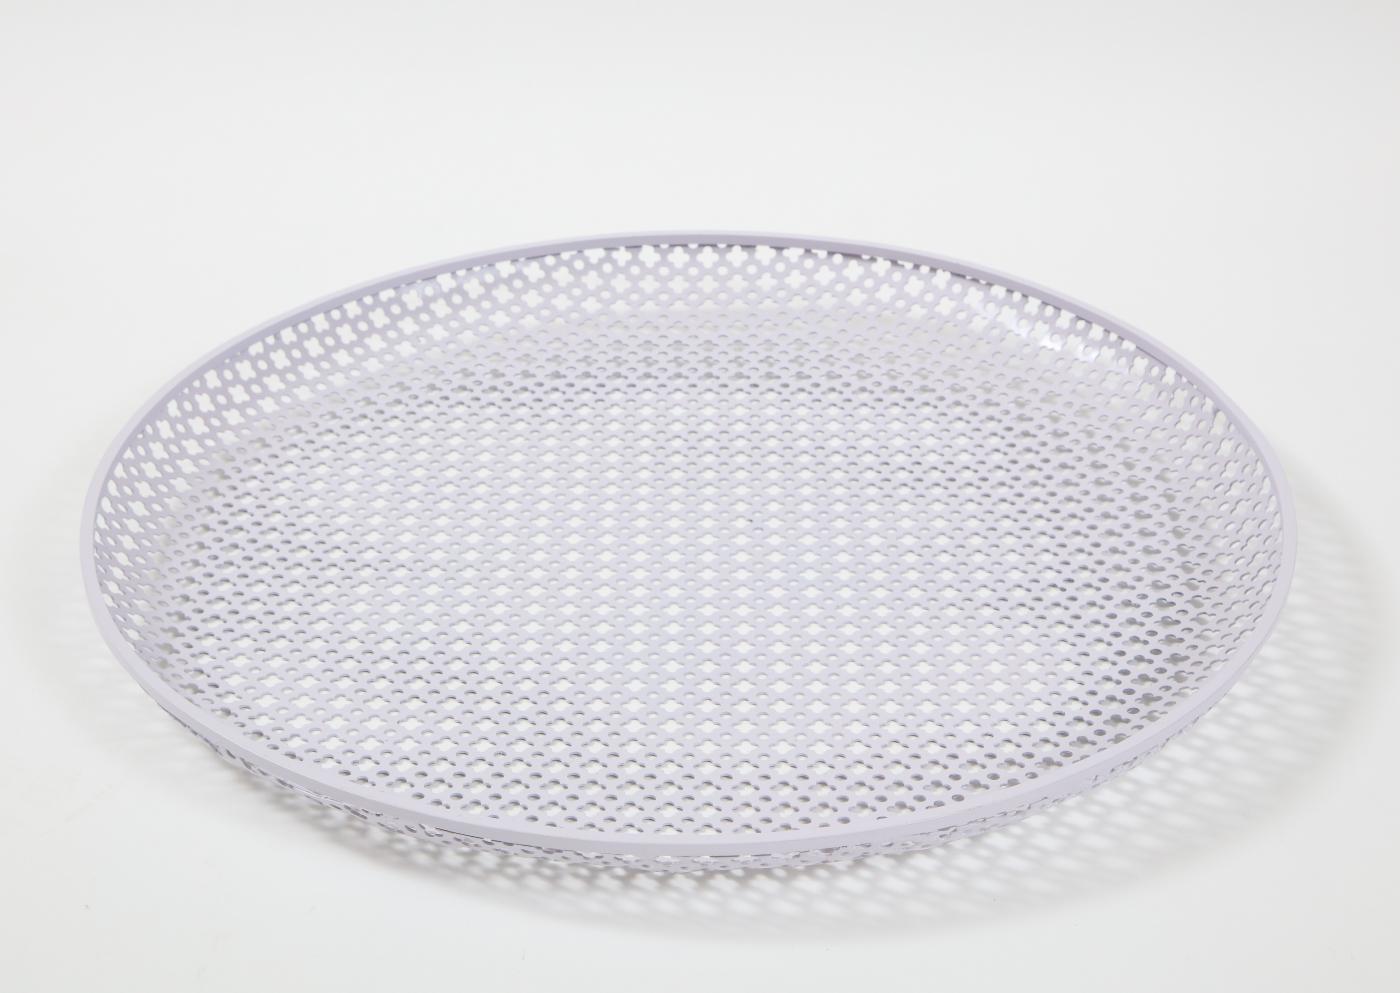 French White Round Perforated Metal Tray by Mathieu Mategot, France, c. 1950 For Sale